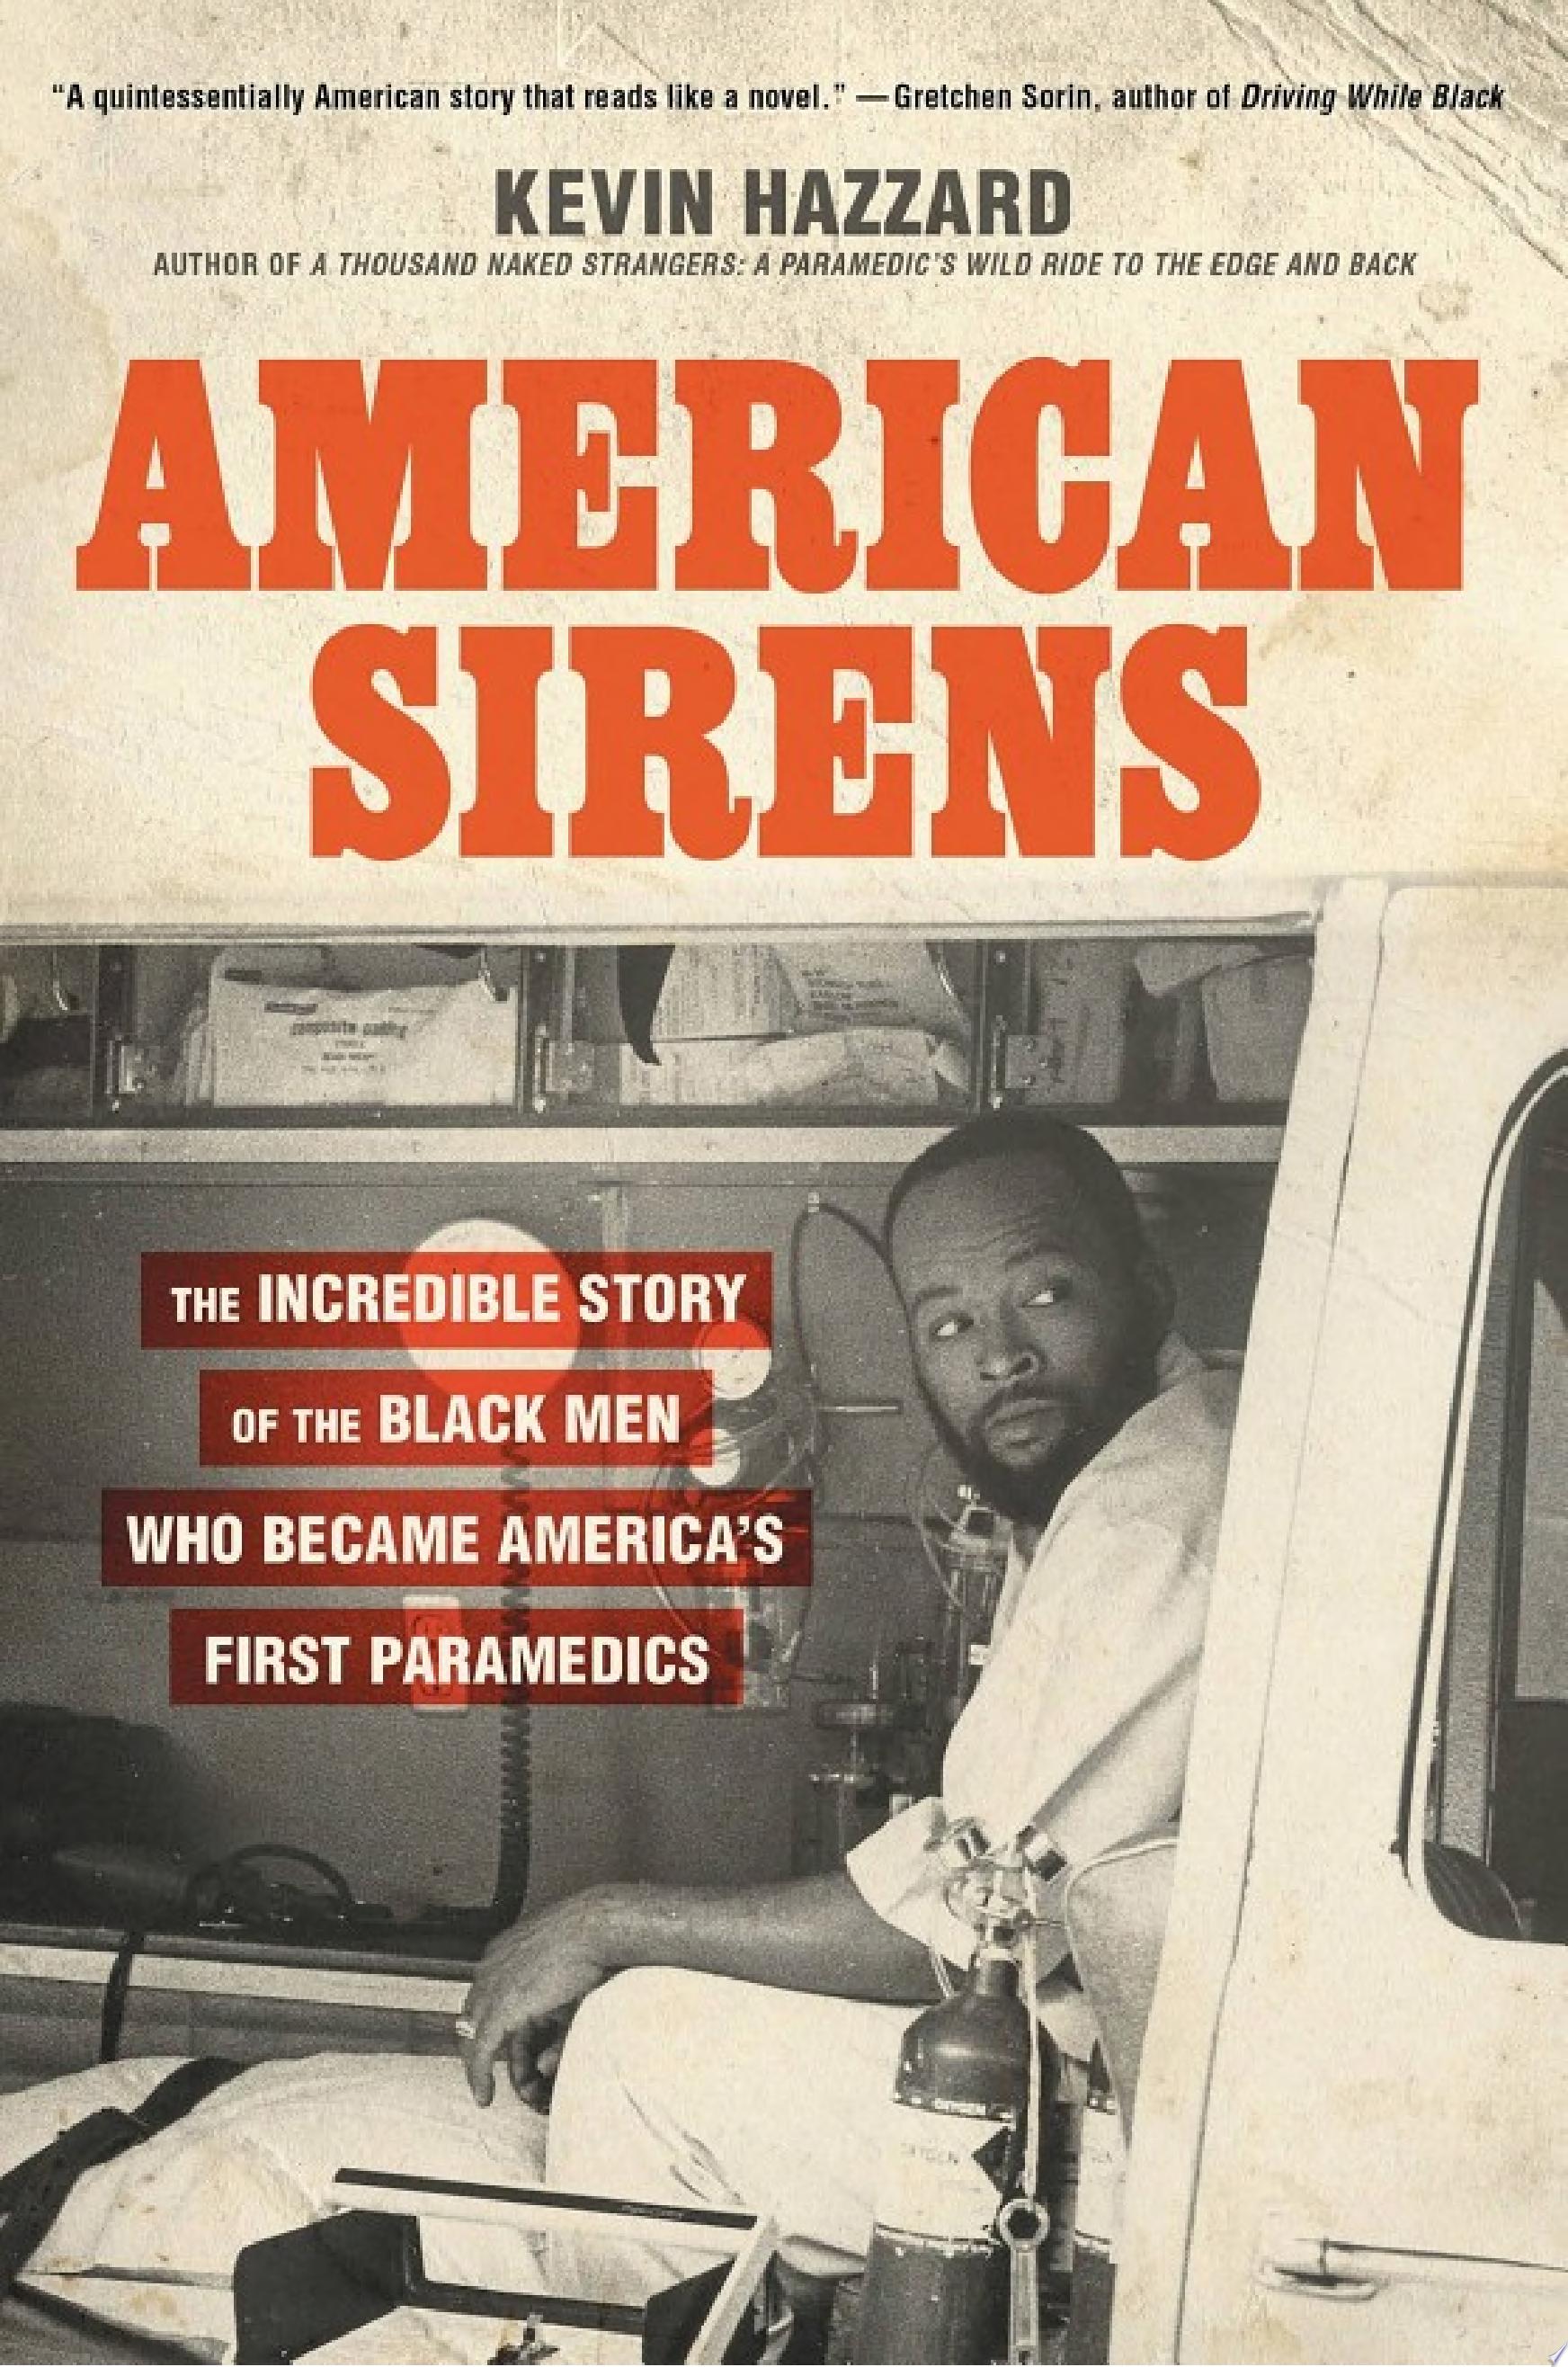 Image for "American Sirens"